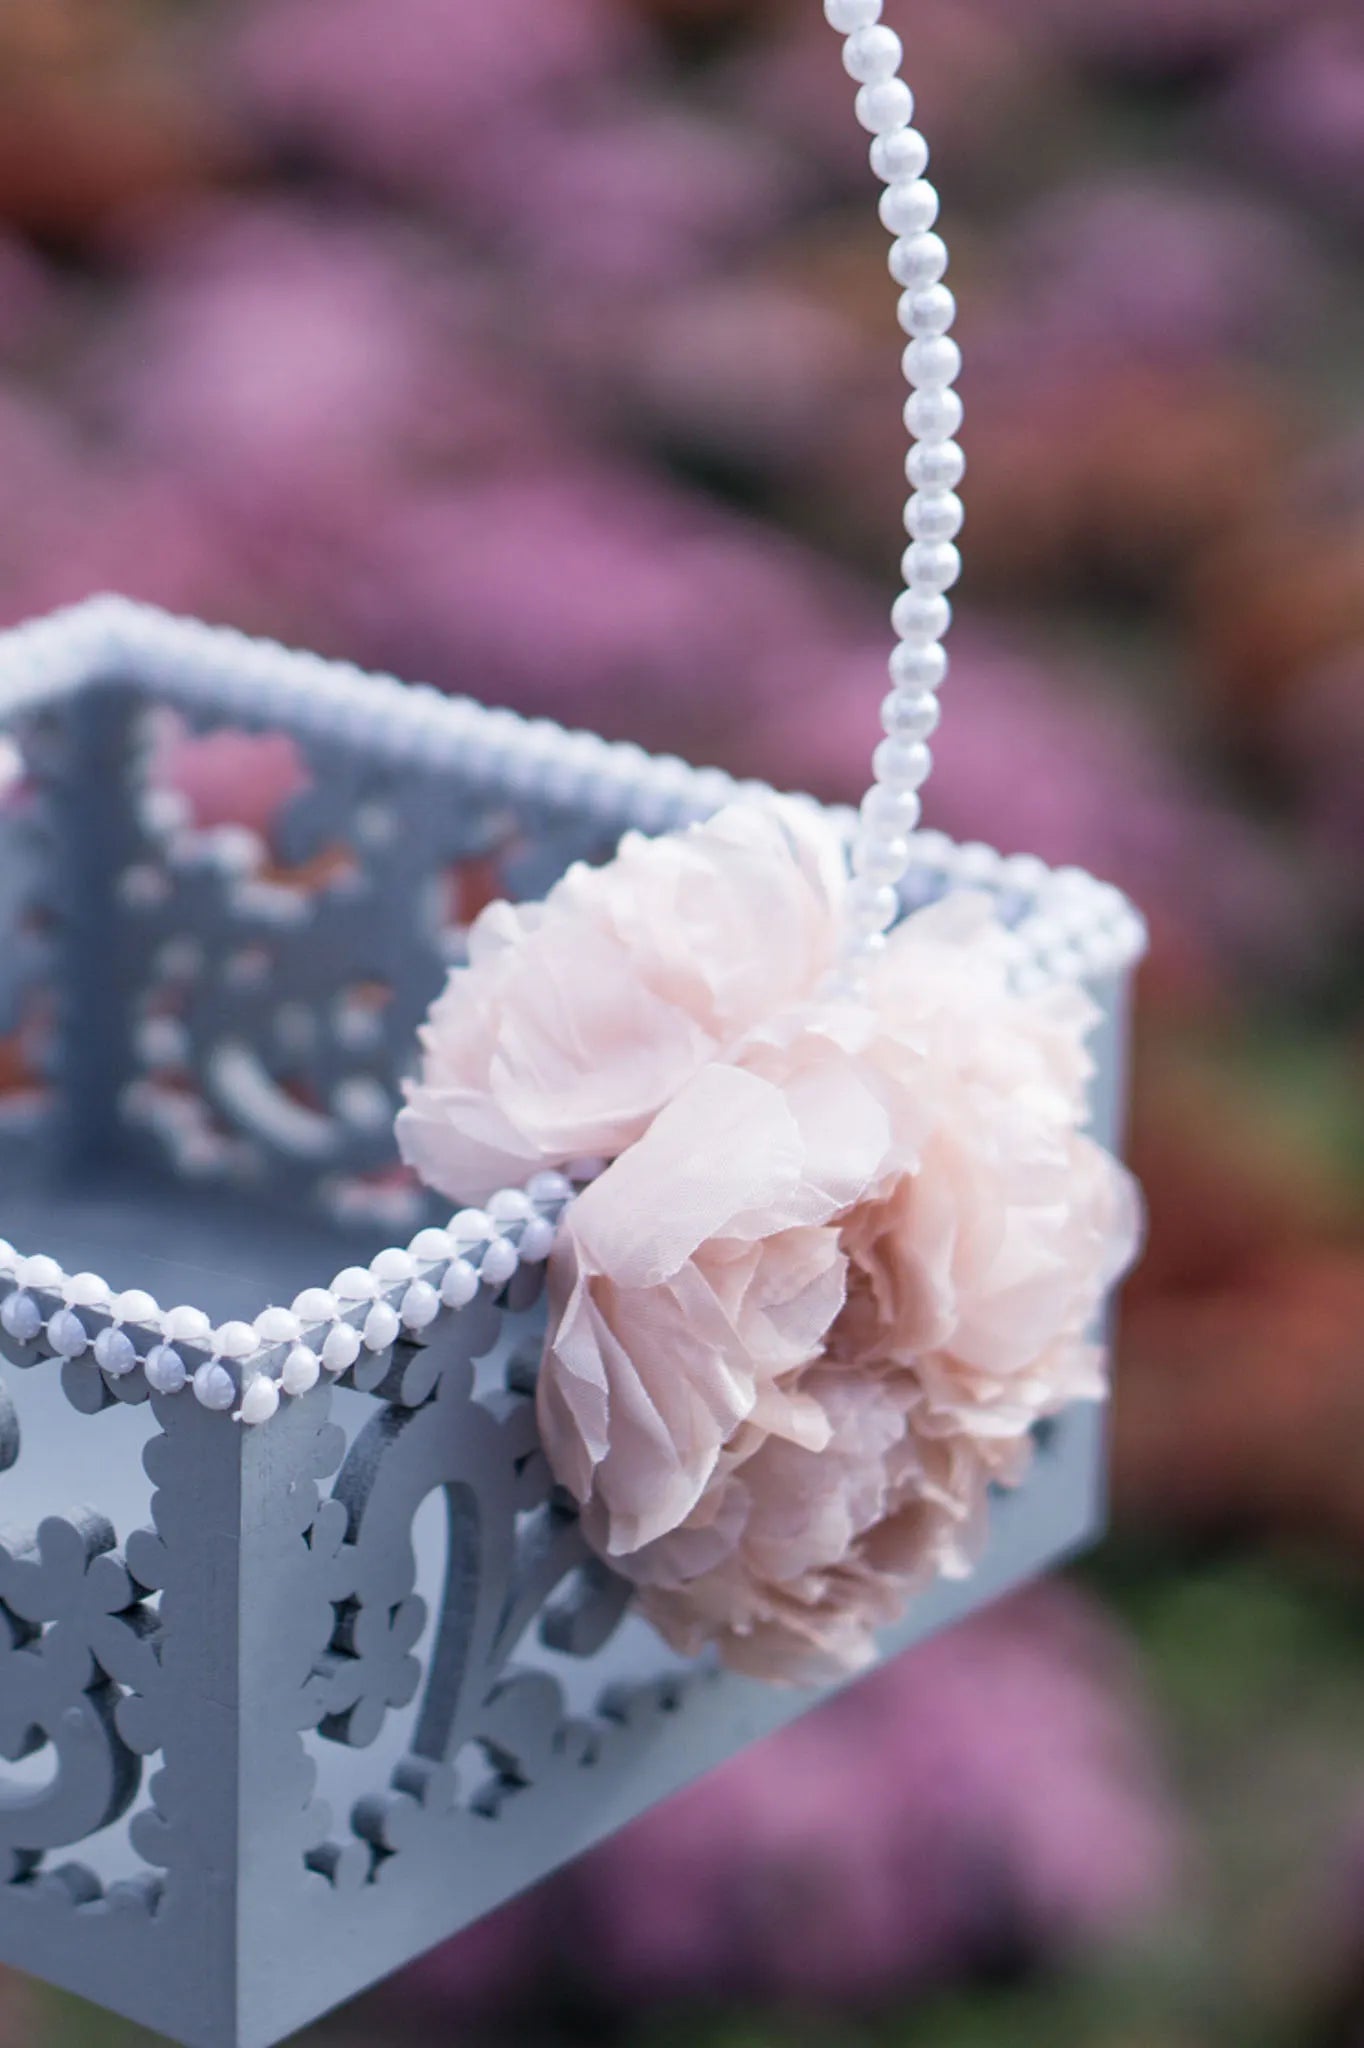 Handcrafted flower girl basket featuring delicate pearl details